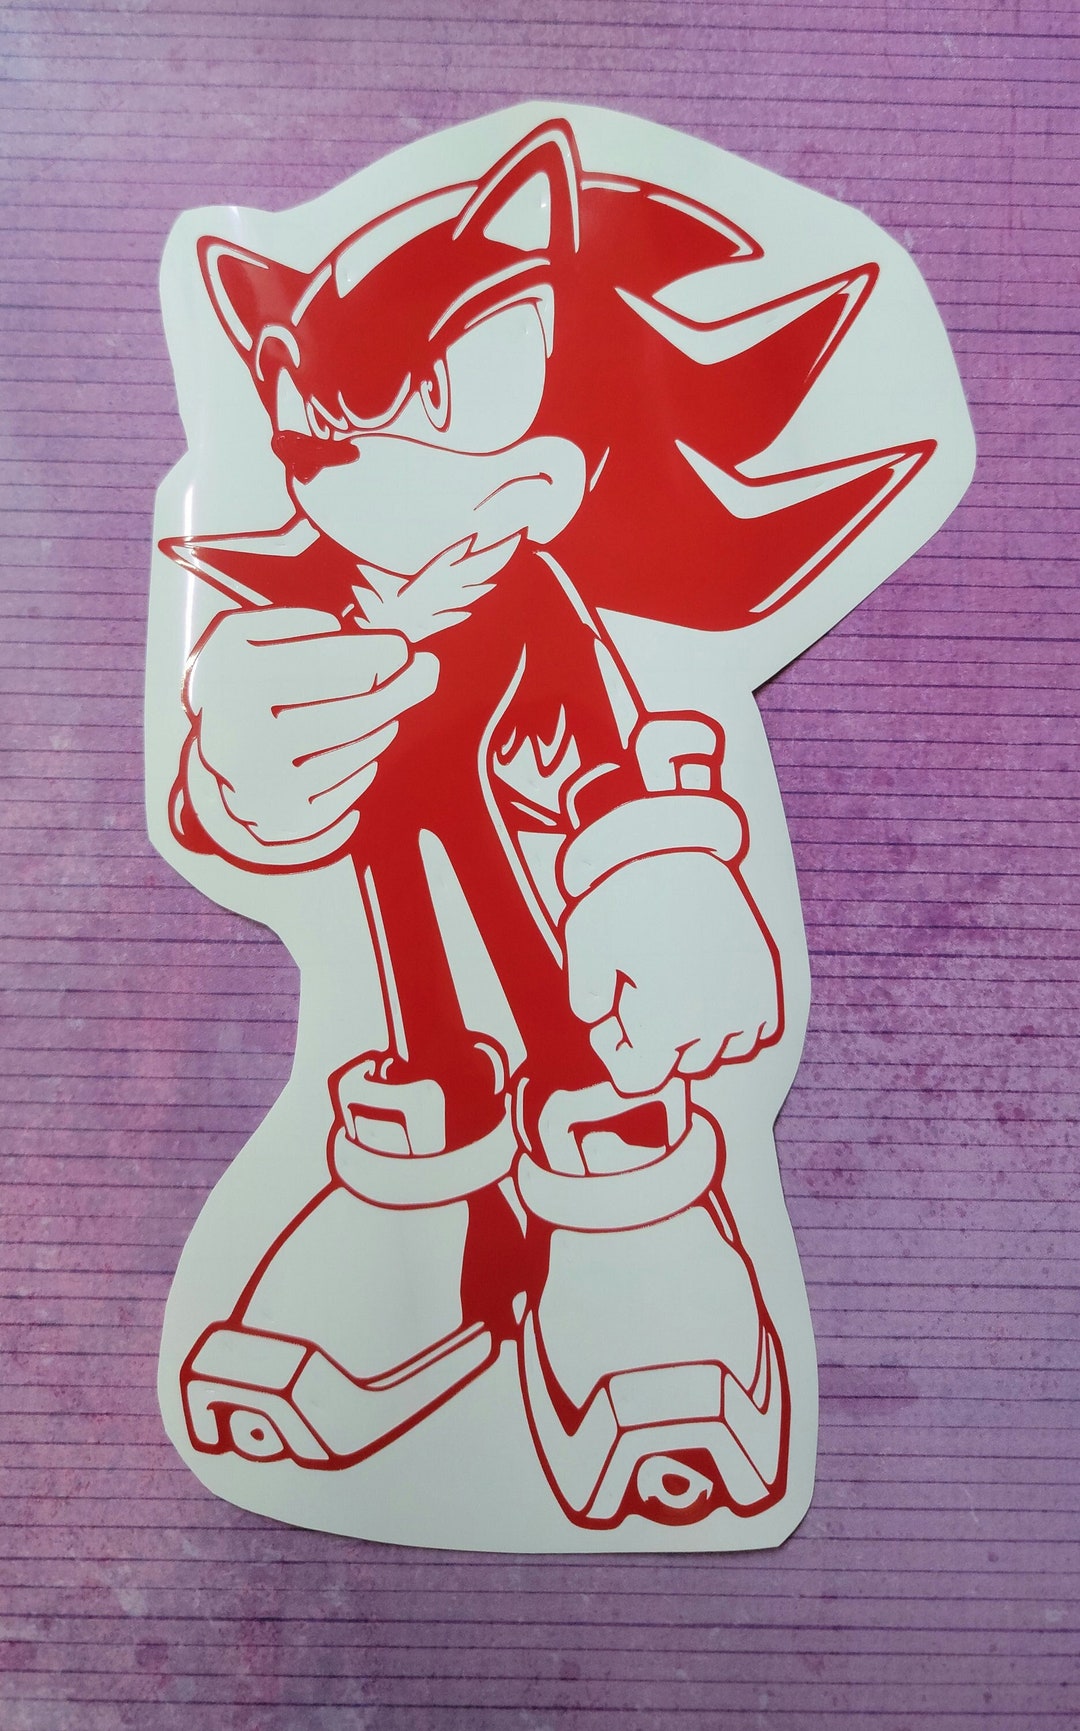 Sonic and shadow the hedgehog - Pro Sport Stickers